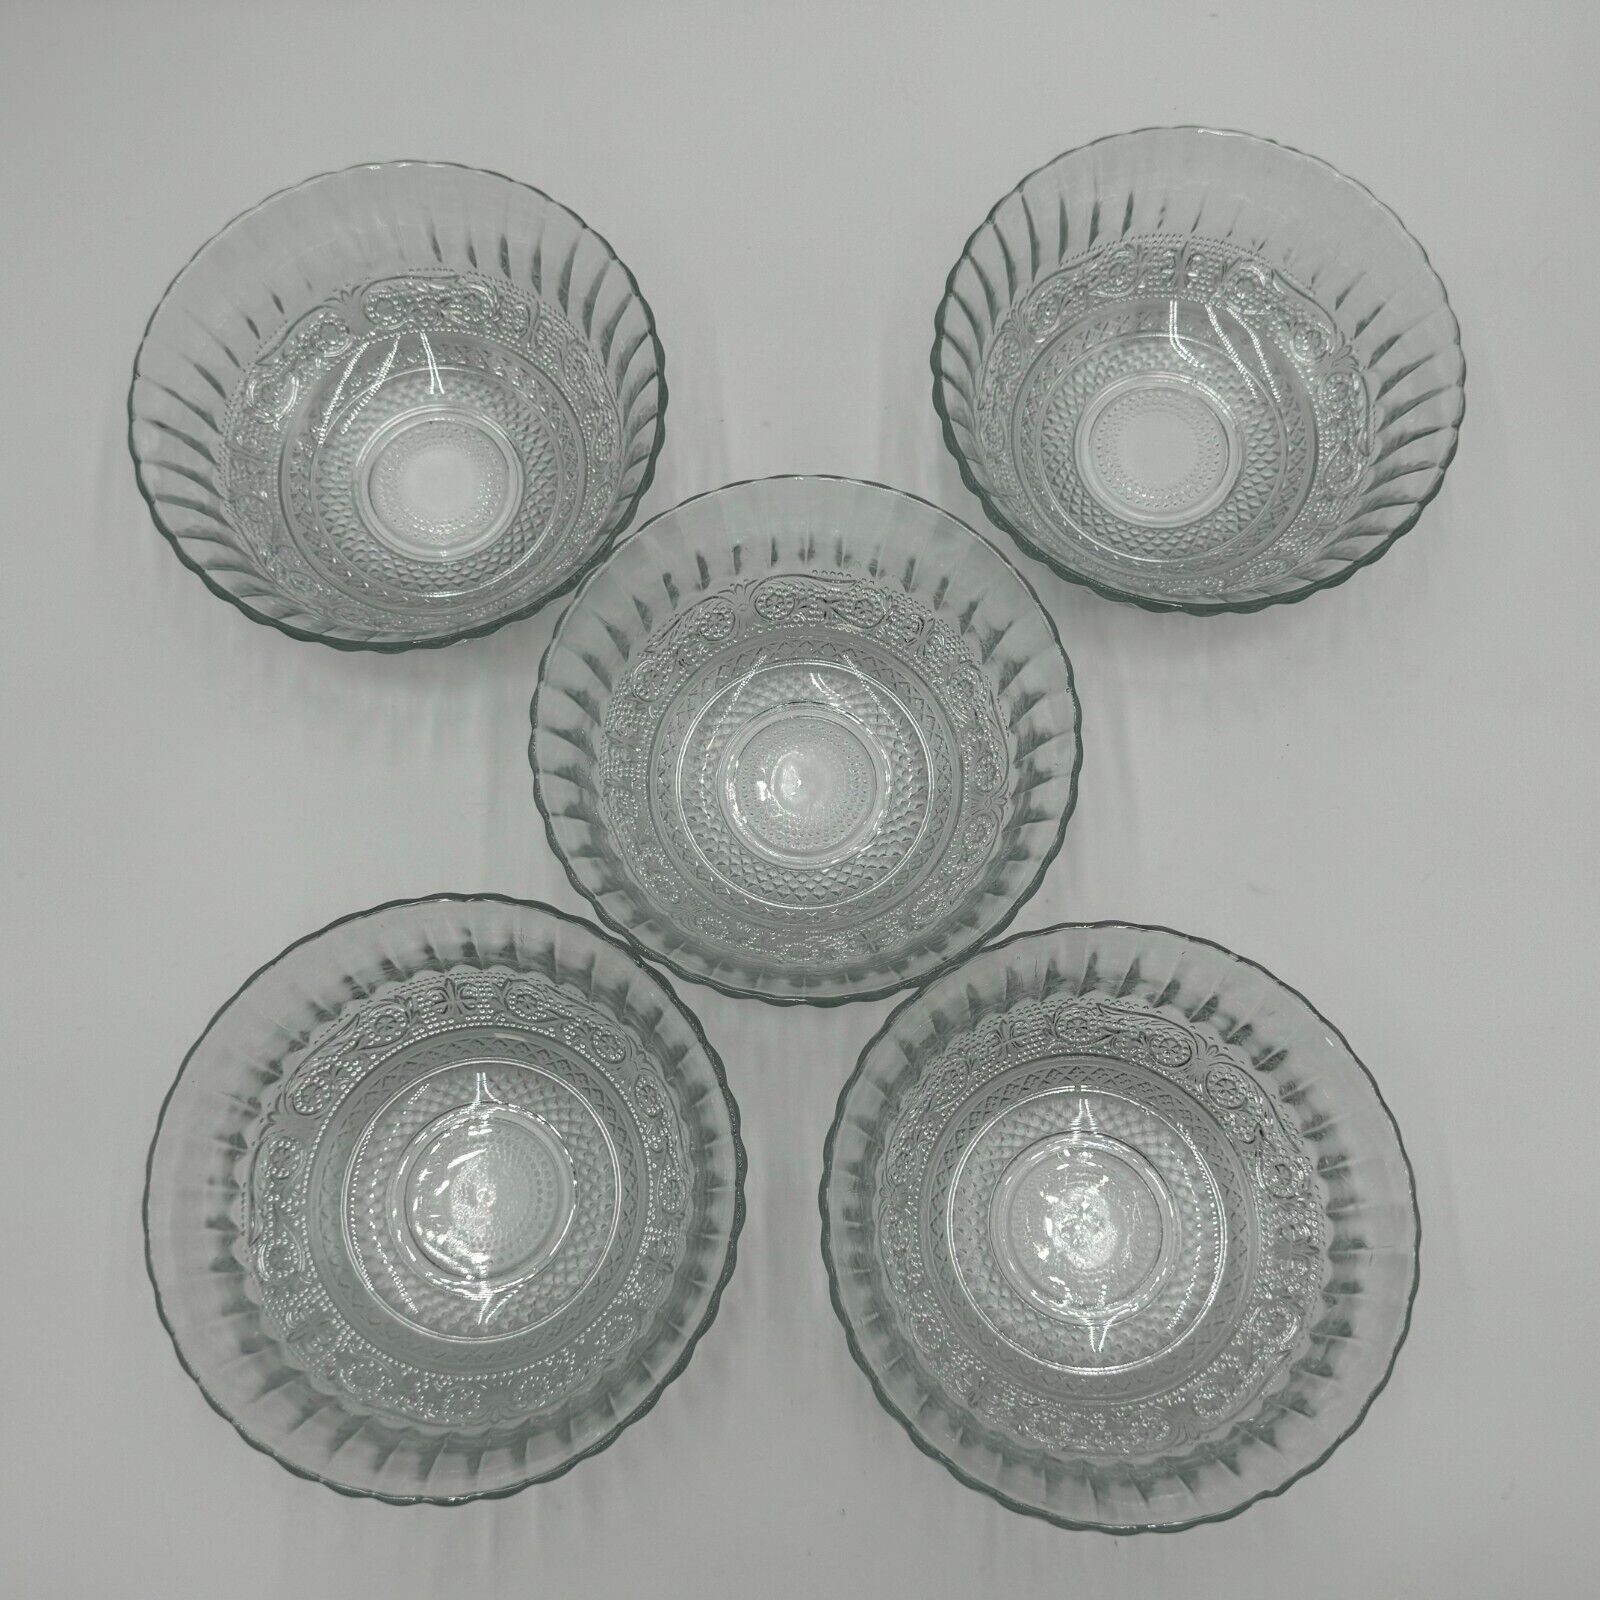 Set of 5 Vintage clear glass Crystal bowl 7 1/2 " Pressed Glass